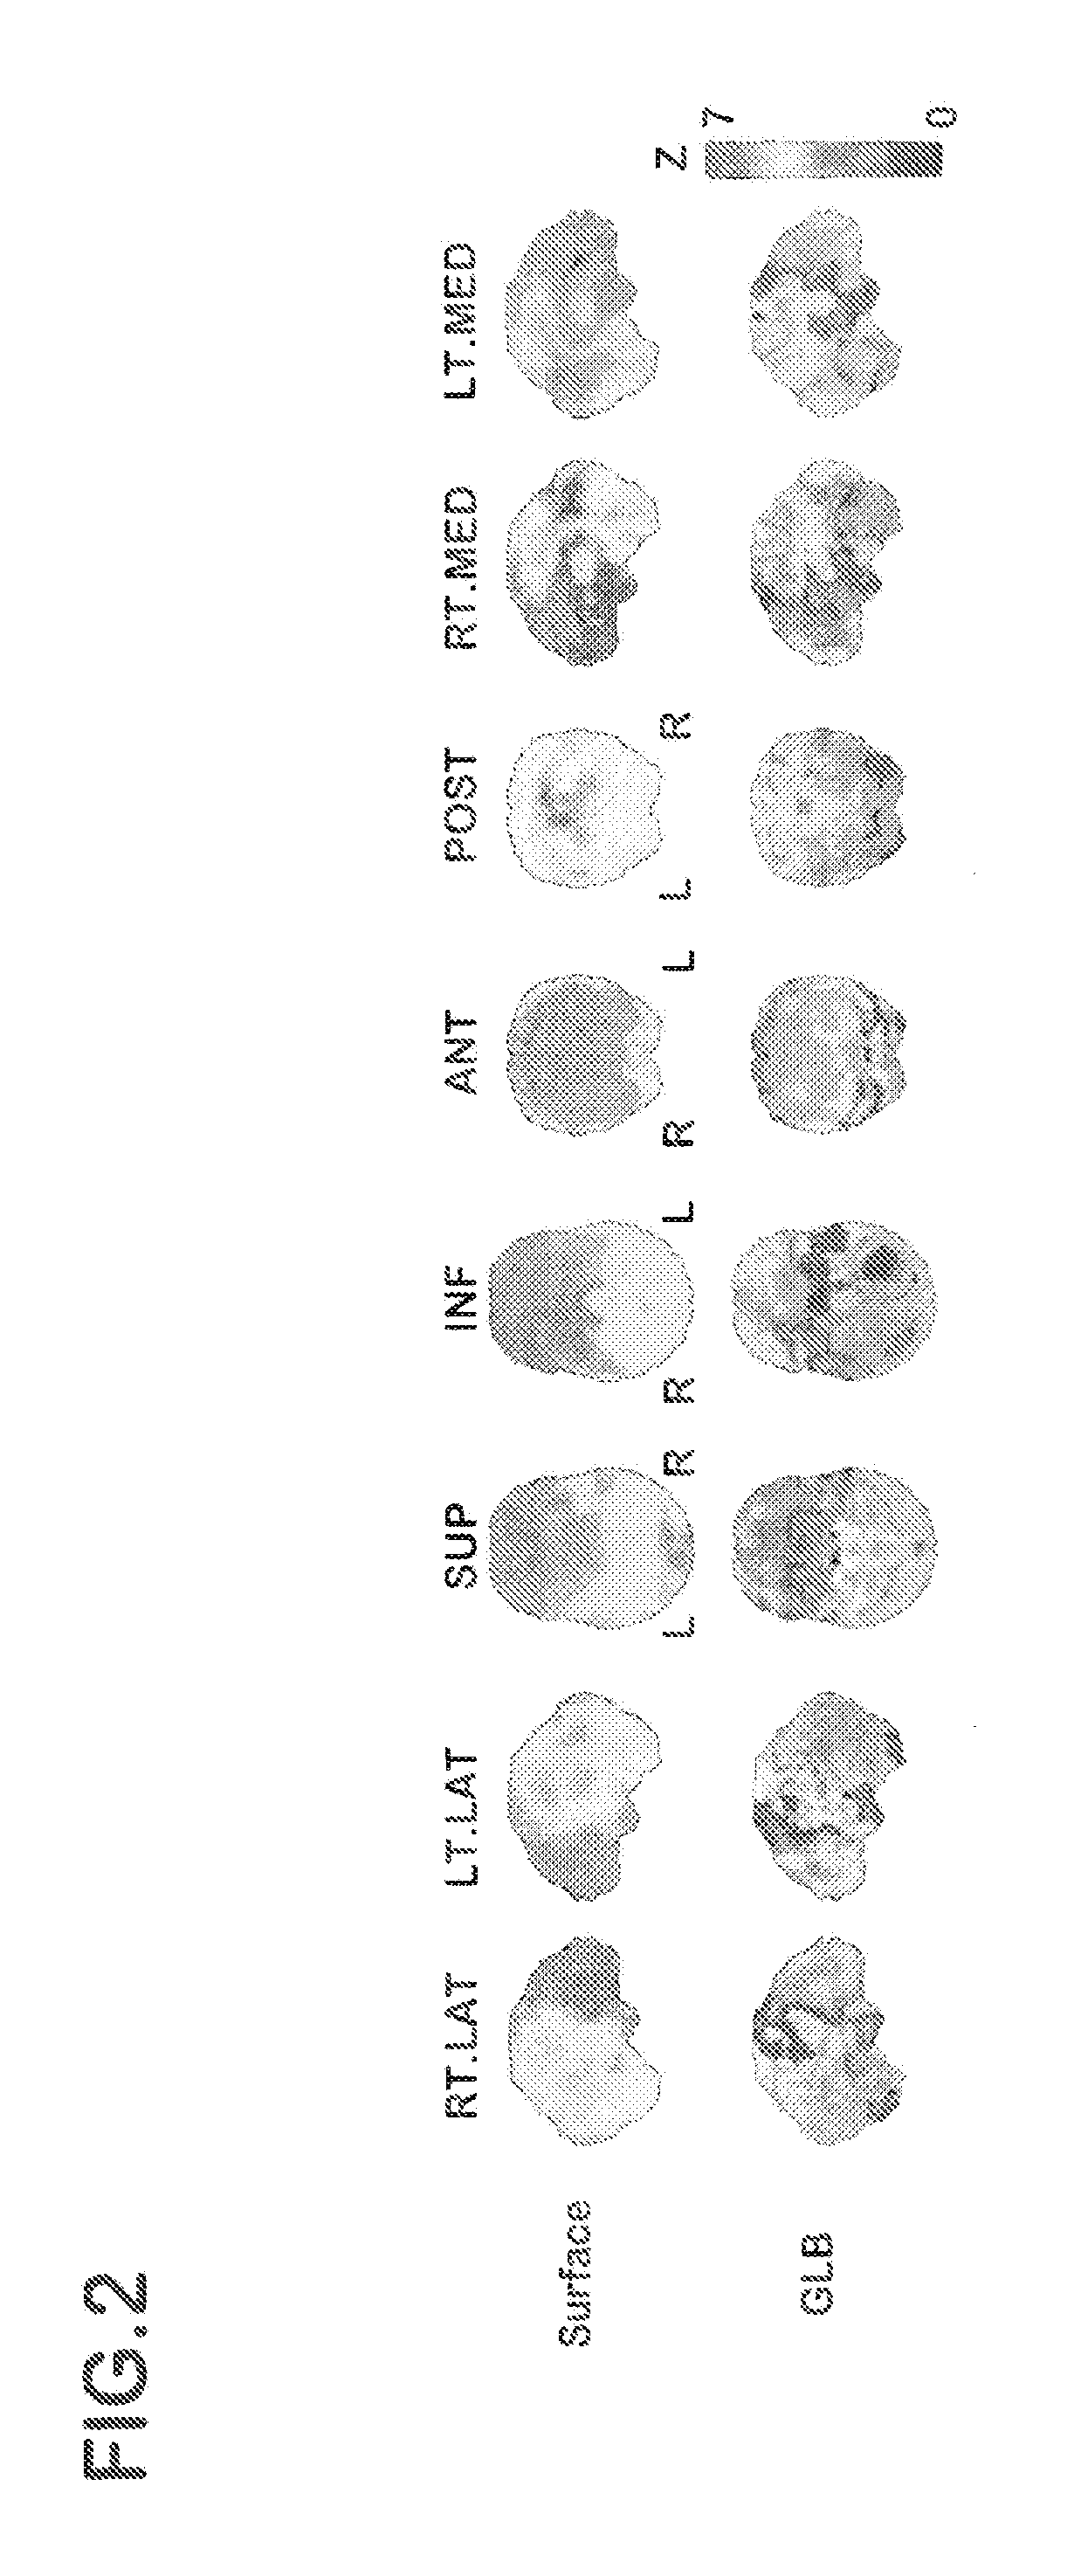 Device for creating database of alternative normal brain